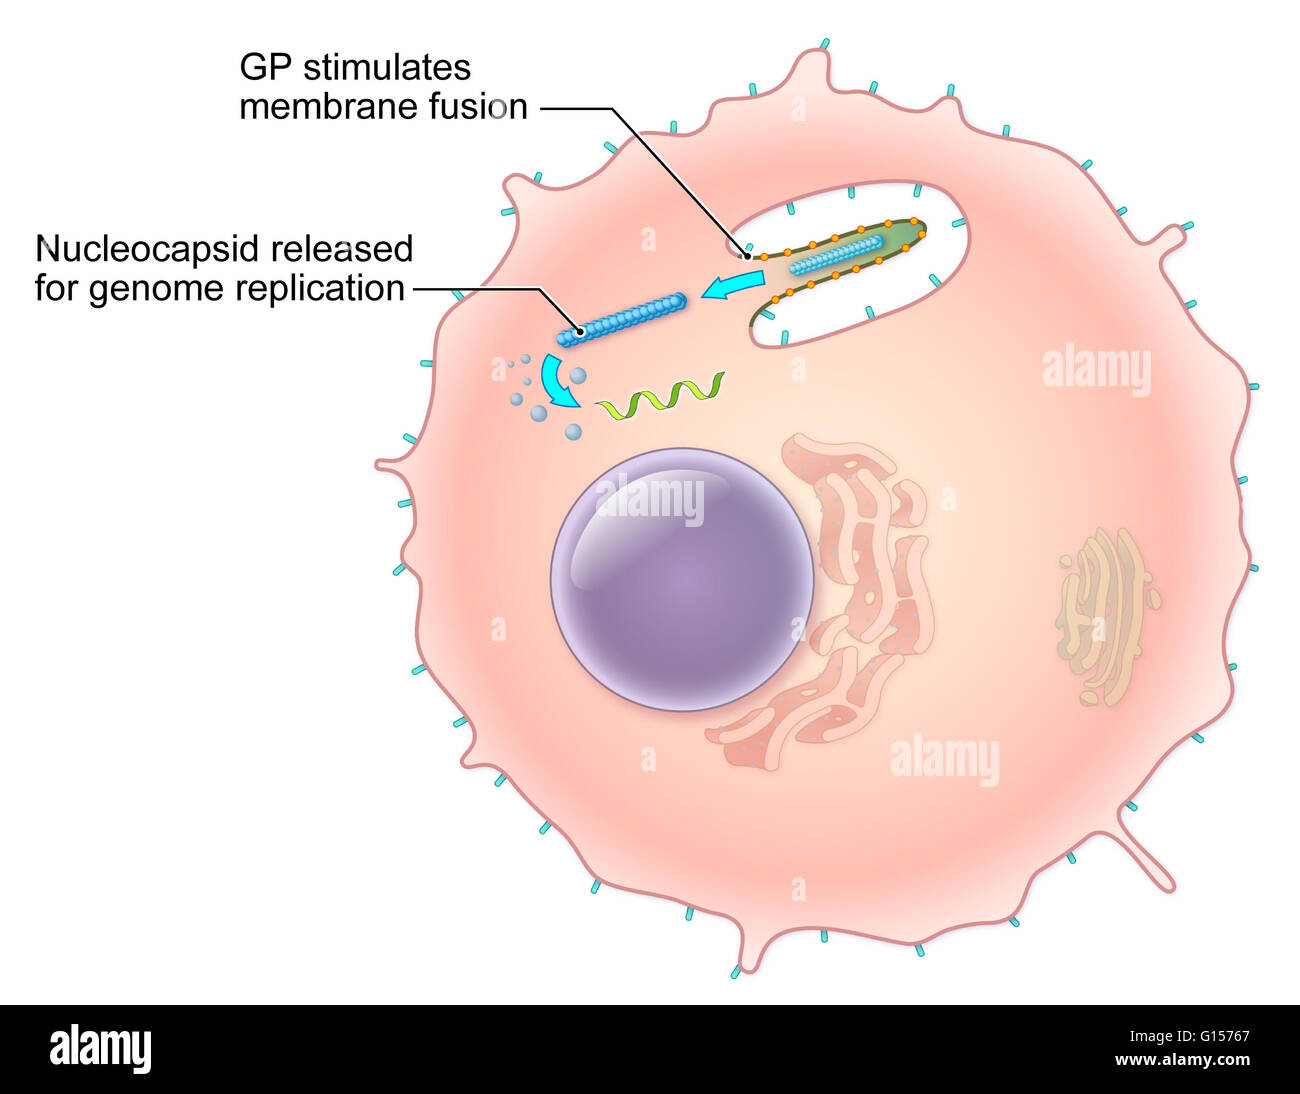 An illustrated diagram of the Ebola virus replication process. The ebola virus is a single-stranded RNA filovirus responsible for severe hemorrhagic fever in humans. In this illustration, glycoprotein spikes (GP) on the surface of the viral membrane stimu Stock Photo